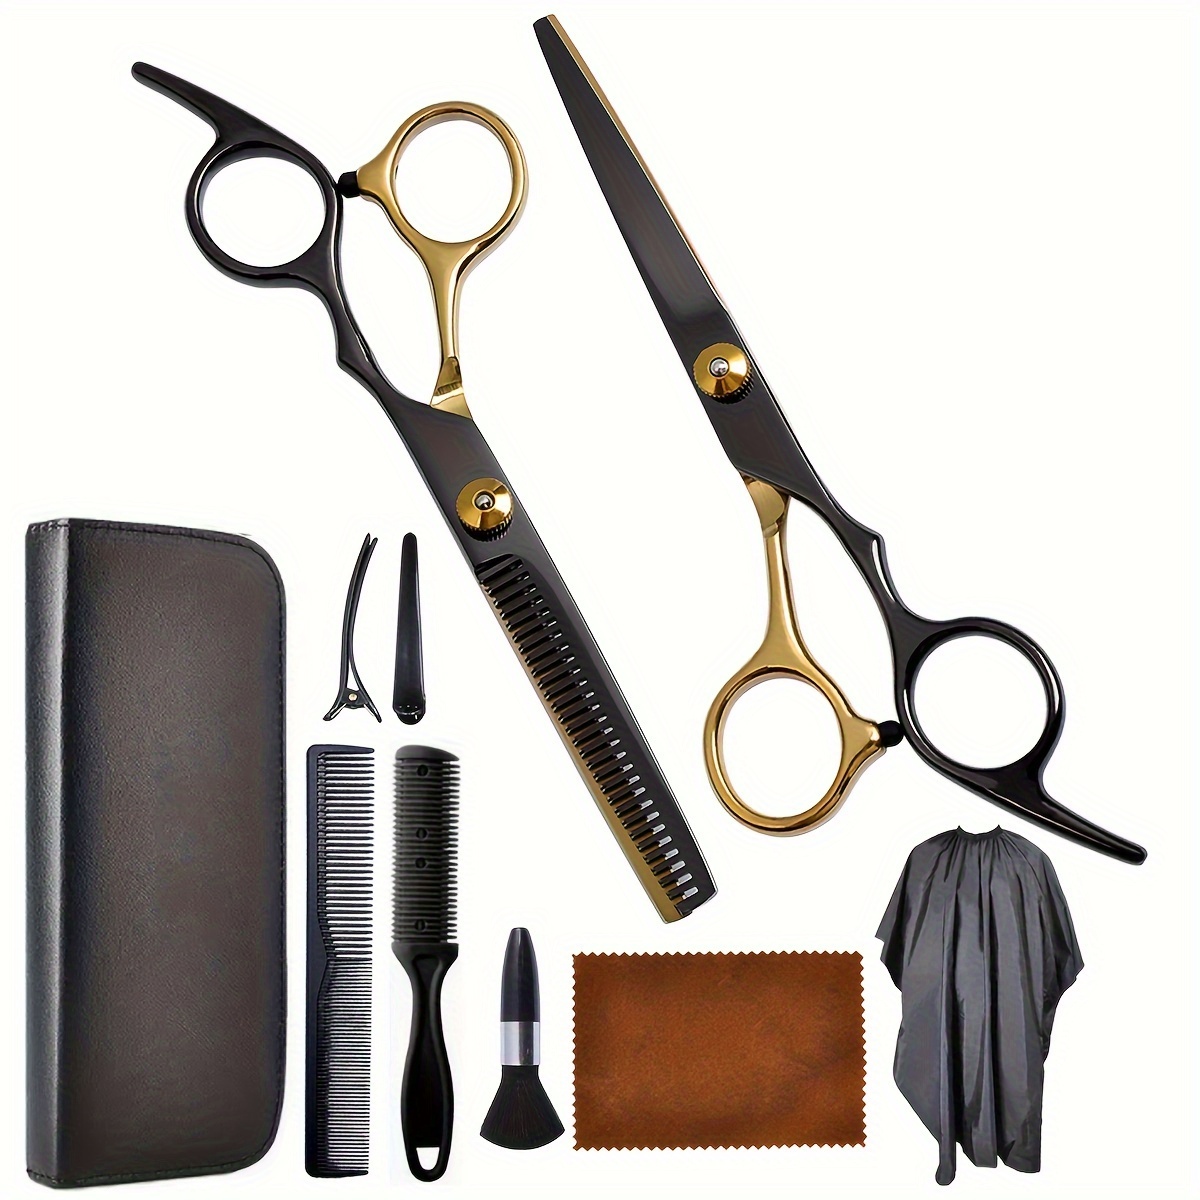 Professional Hairdressing Scissors Set 6 Hair Cutting Scissors and